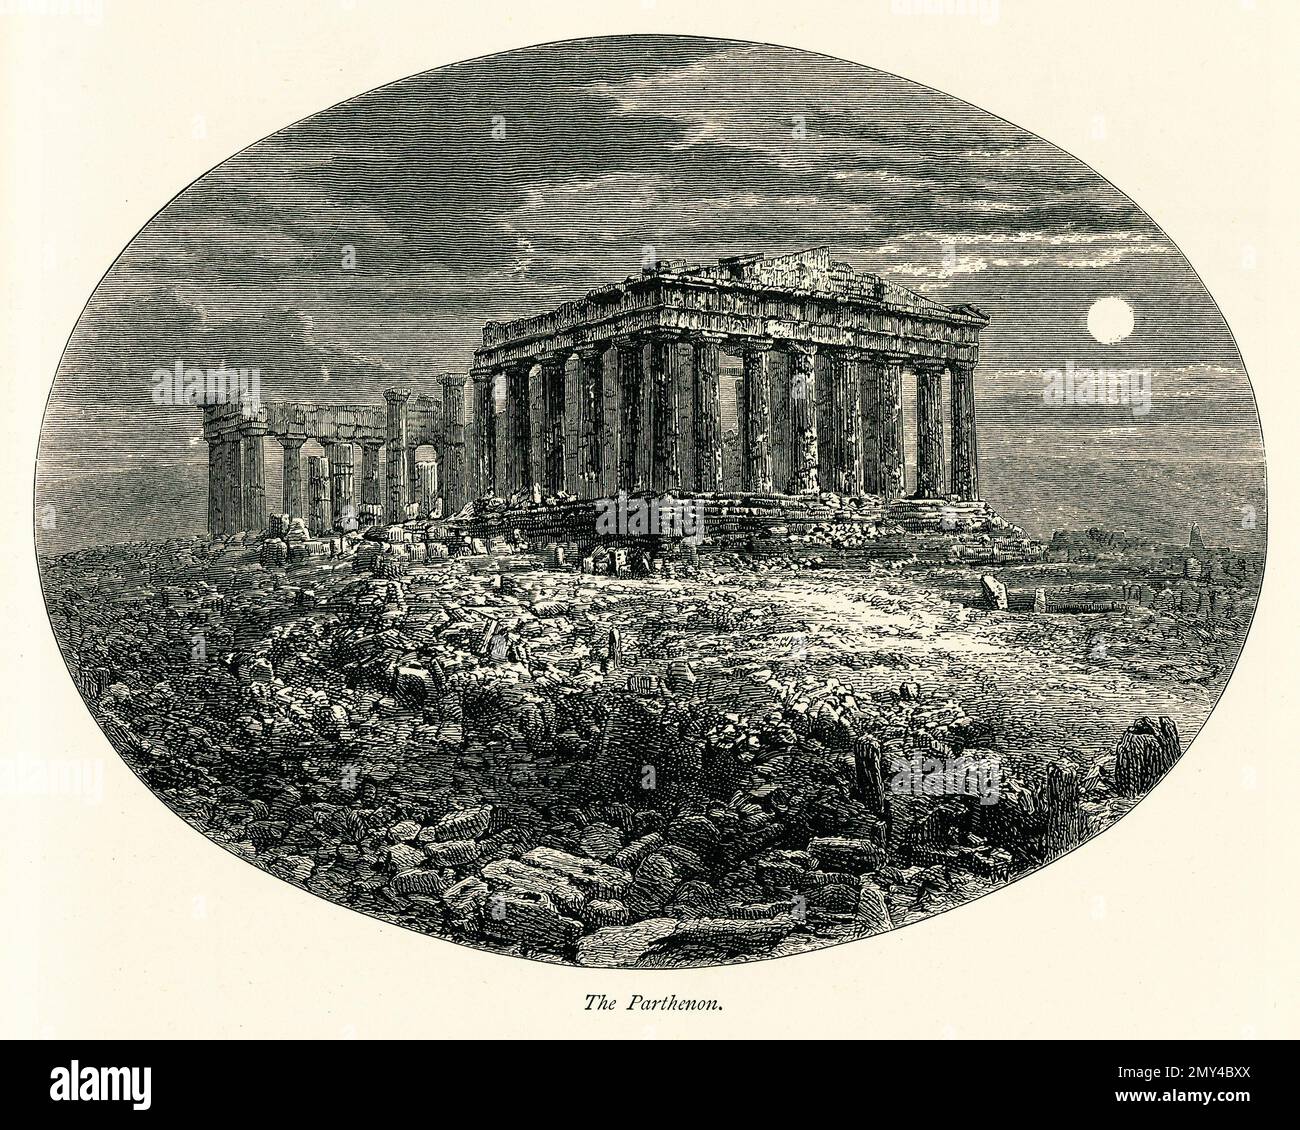 Antique engraving of the Parthenon, a temple of the Greek goddess Athena in Athens, Greece. Illustration published in Picturesque Europe, Vol. V (Cass Stock Photo